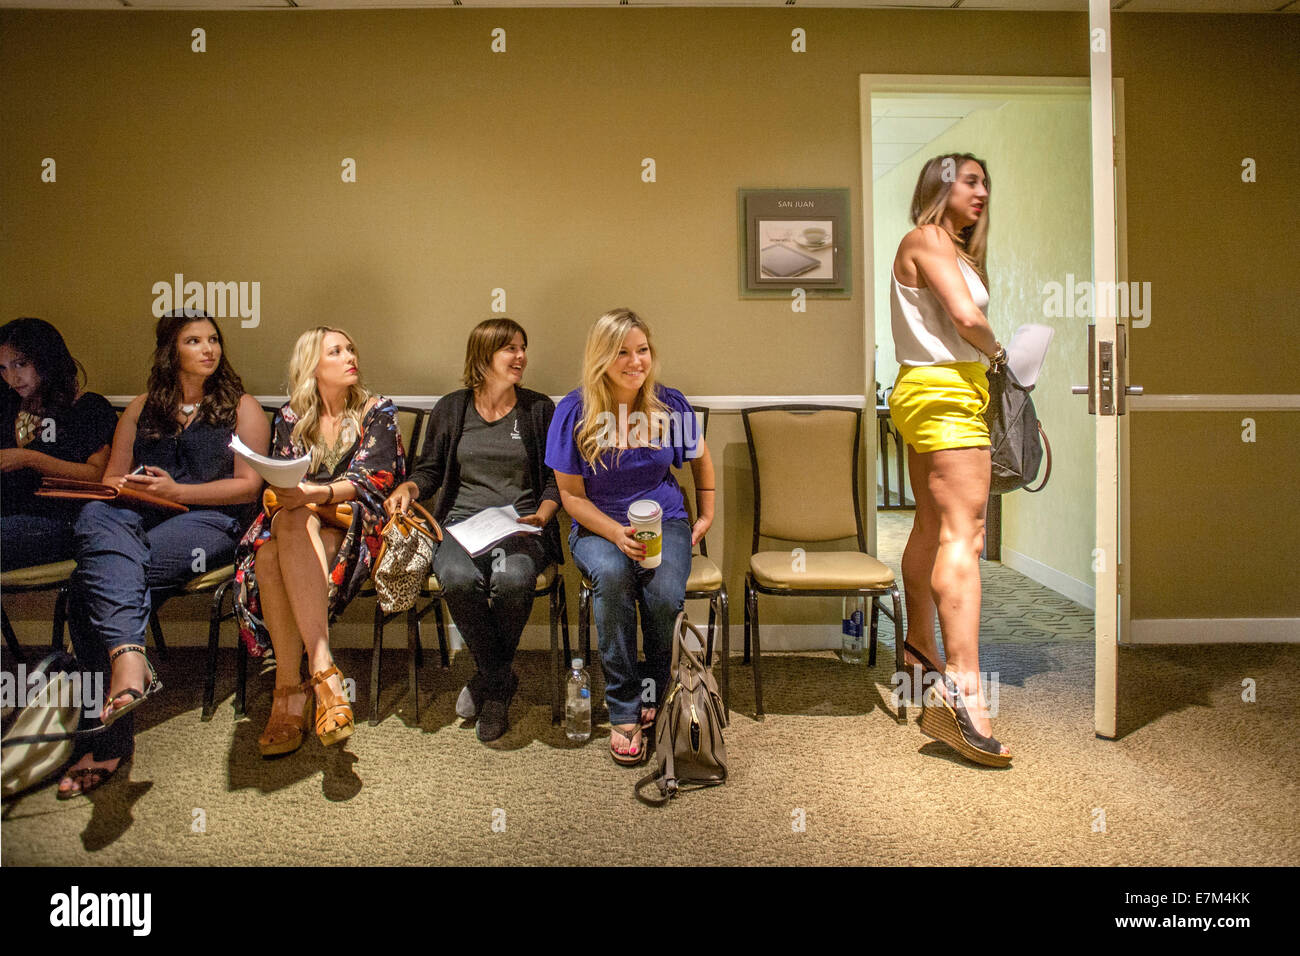 A group of attractive young women in Costa Mesa, CA, wait in a hotel hallway while one of them goes to her video interview at an audition for the TV show 'The Bachelor.' Stock Photo